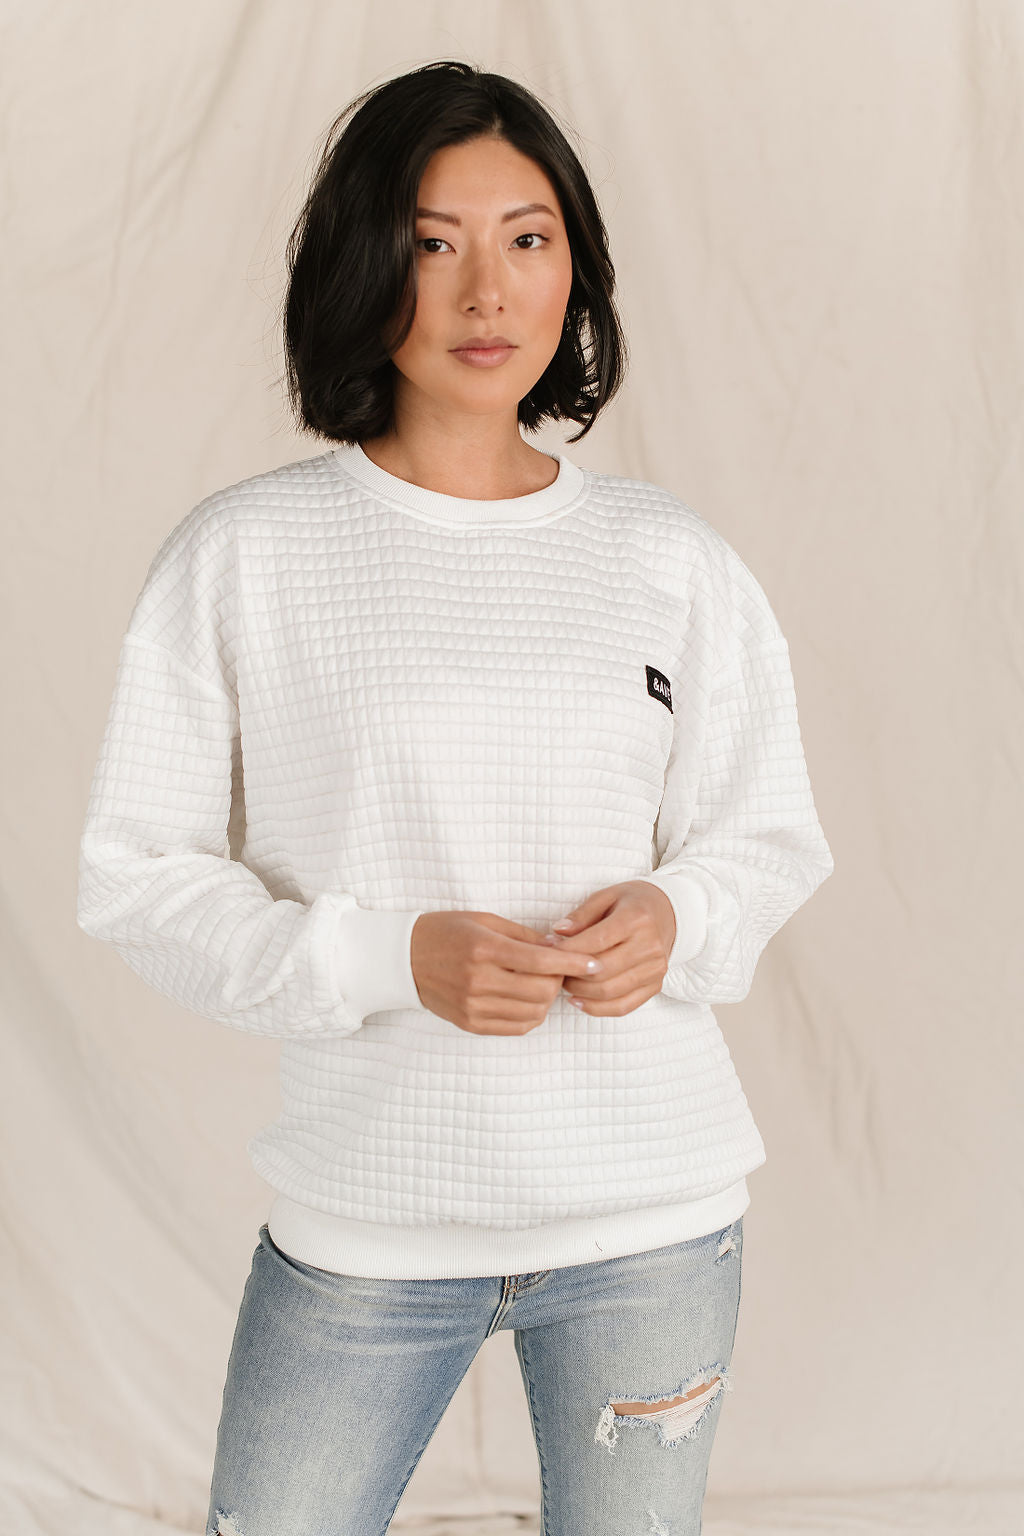 Ampersand Avenue Quilted Pullover - White &ave